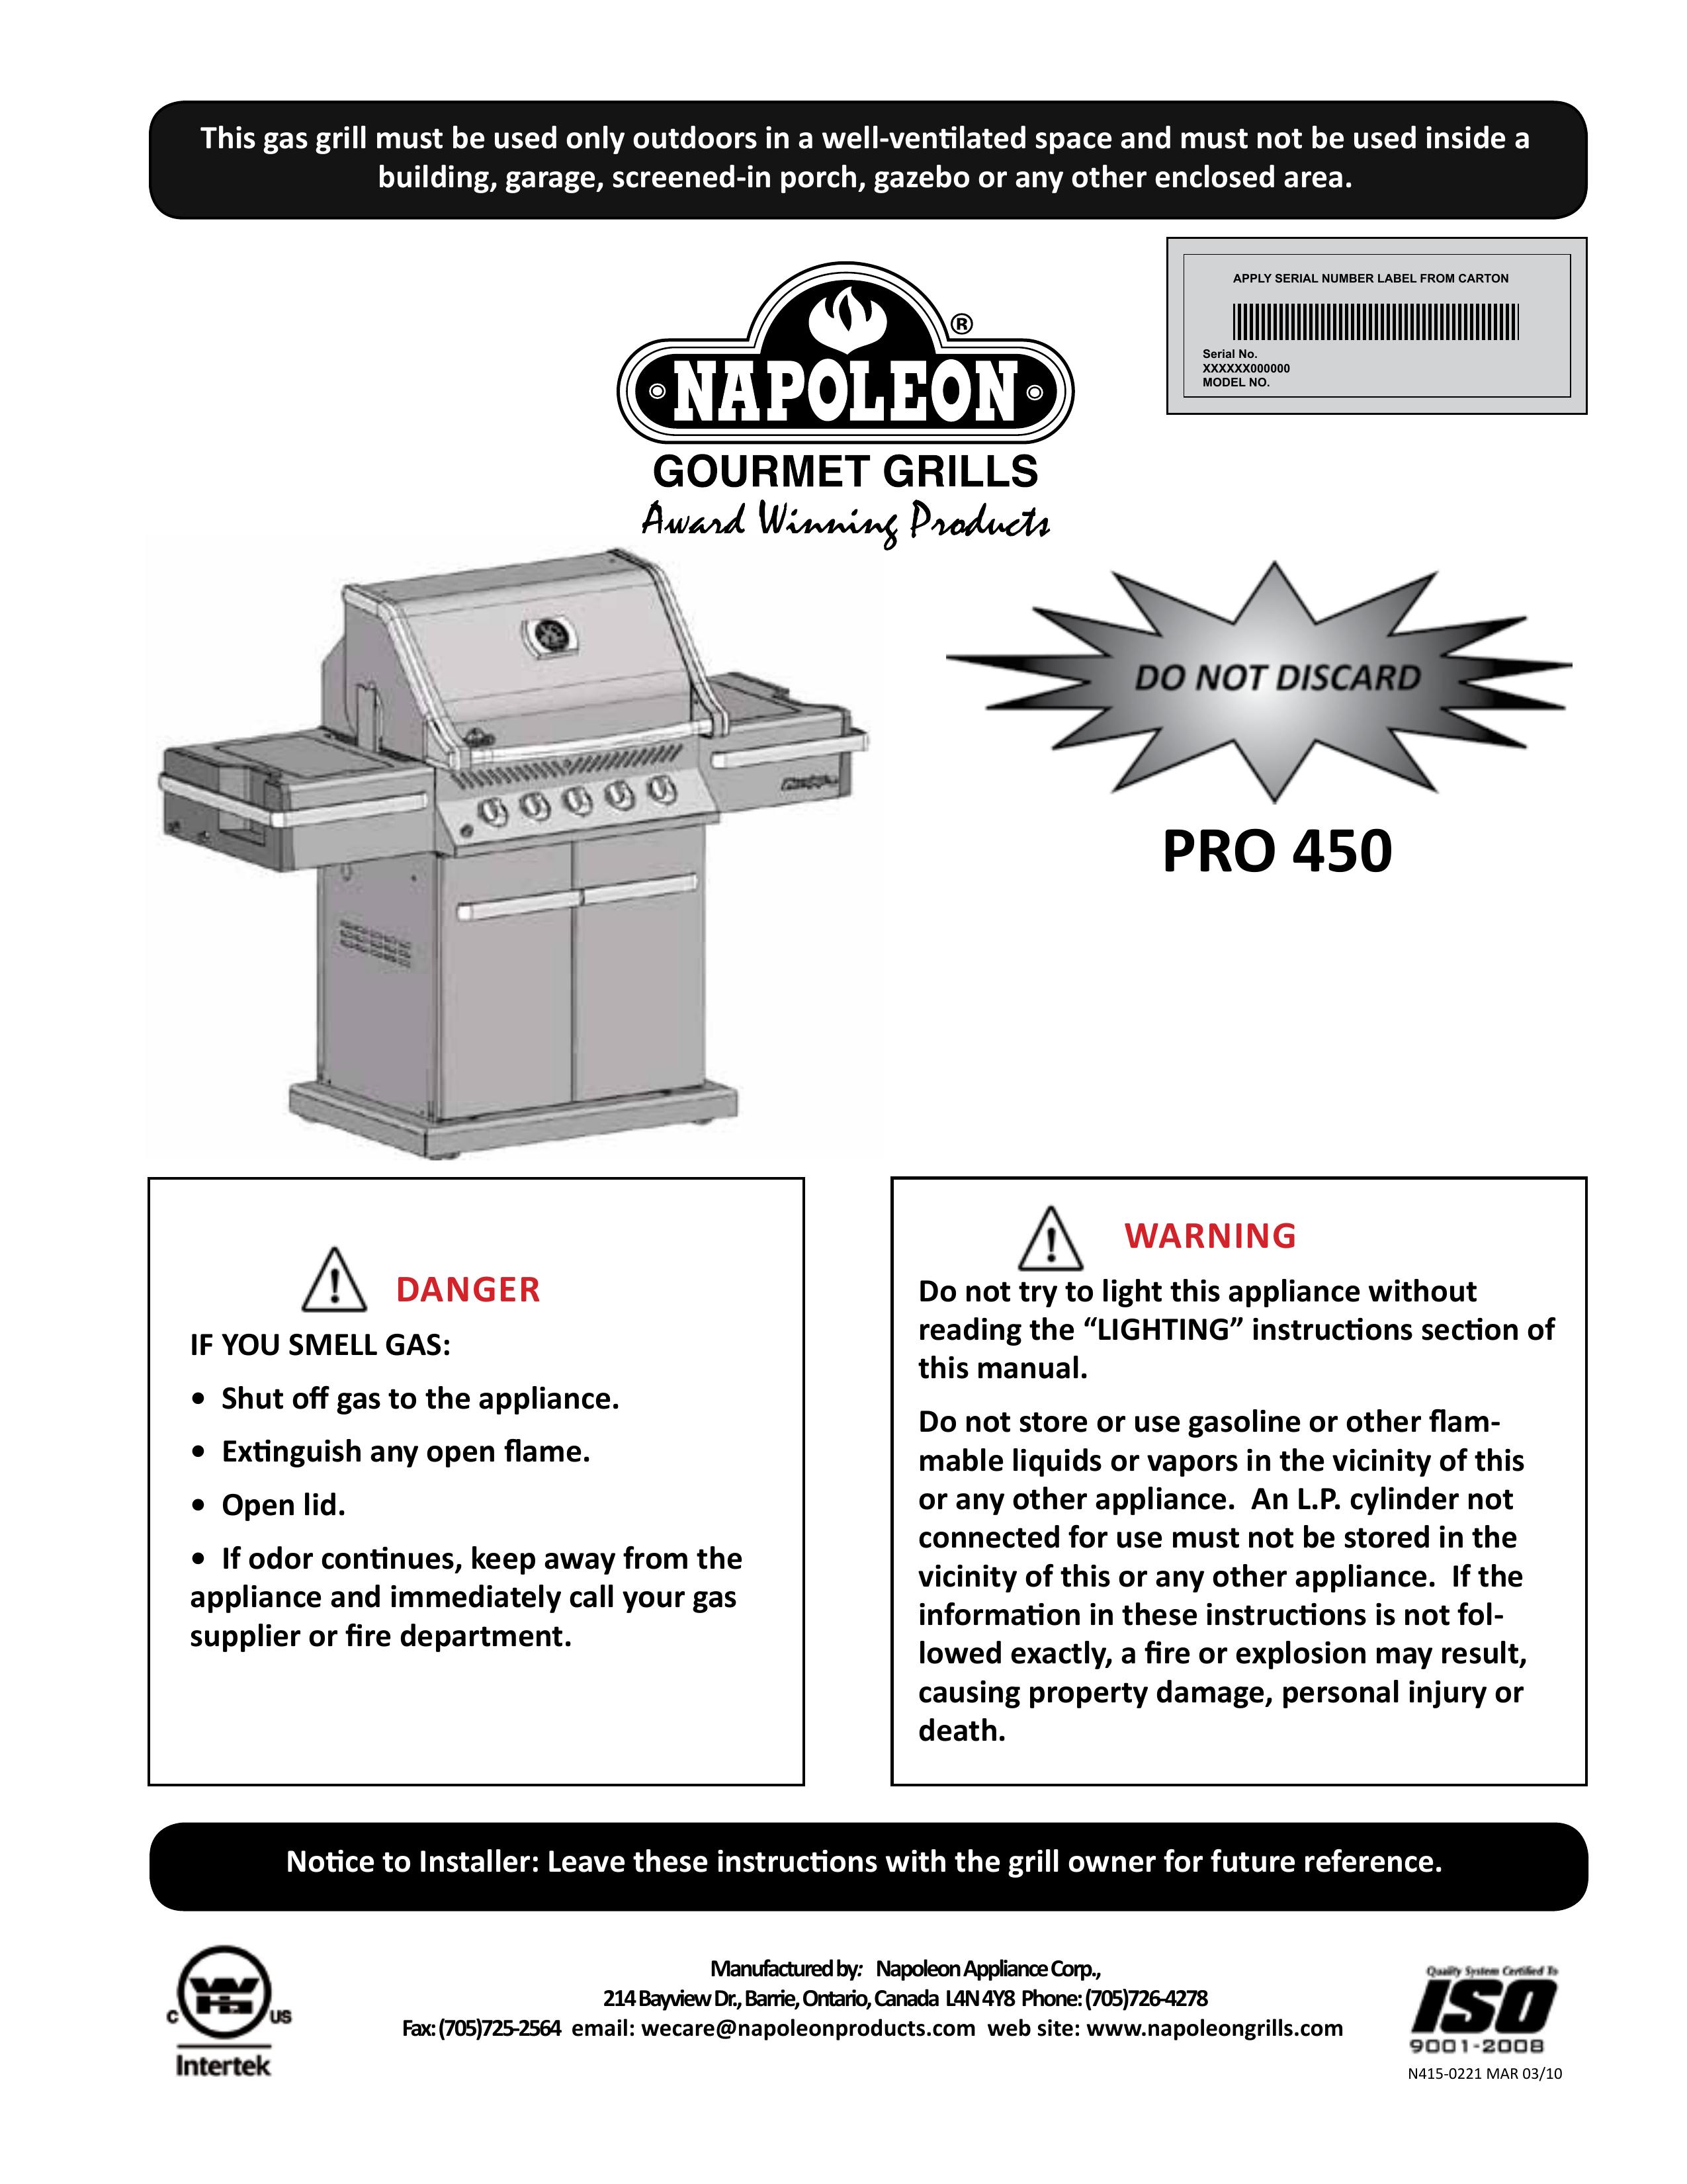 Napoleon Grills PRO 450 Gas Grill User Manual